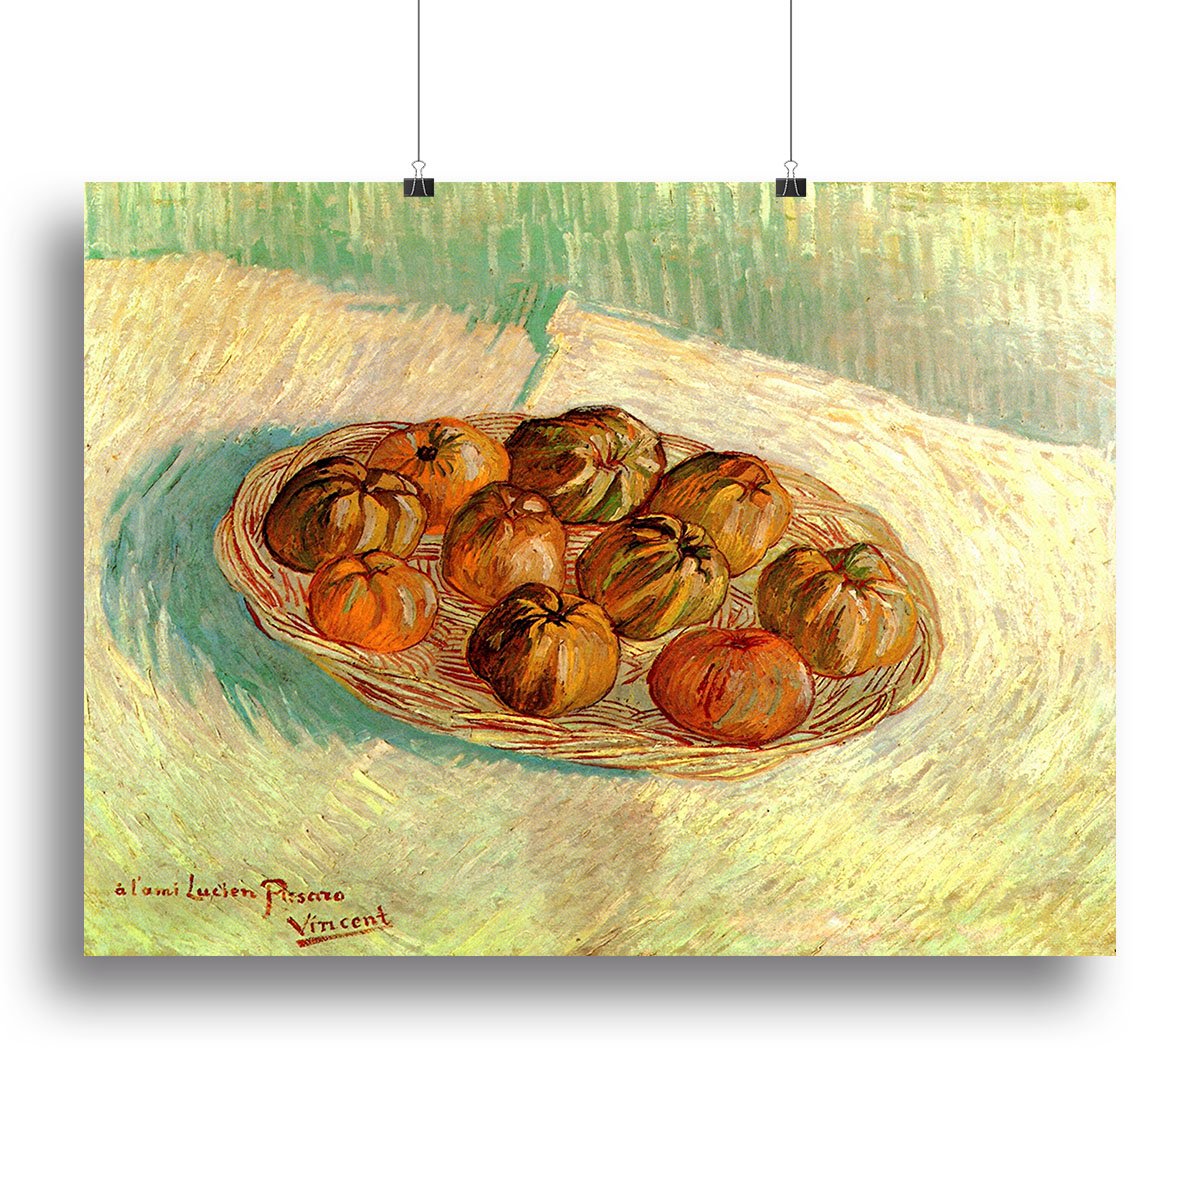 Still Life with Basket of Apples to Lucien Pissarro by Van Gogh Canvas Print or Poster